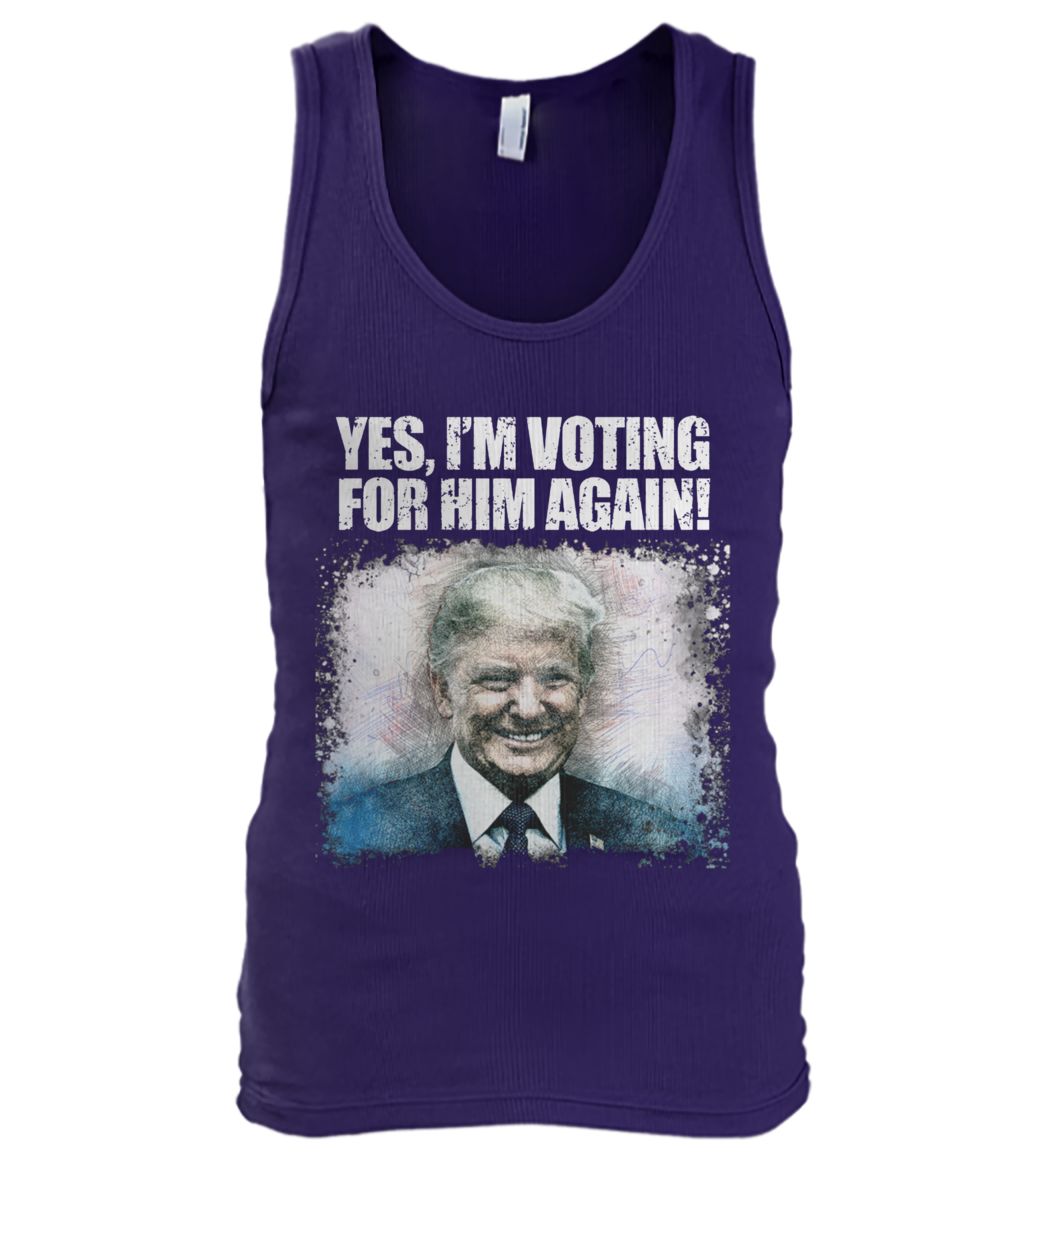 Donald trump yes I'm voting for him again men's tank top